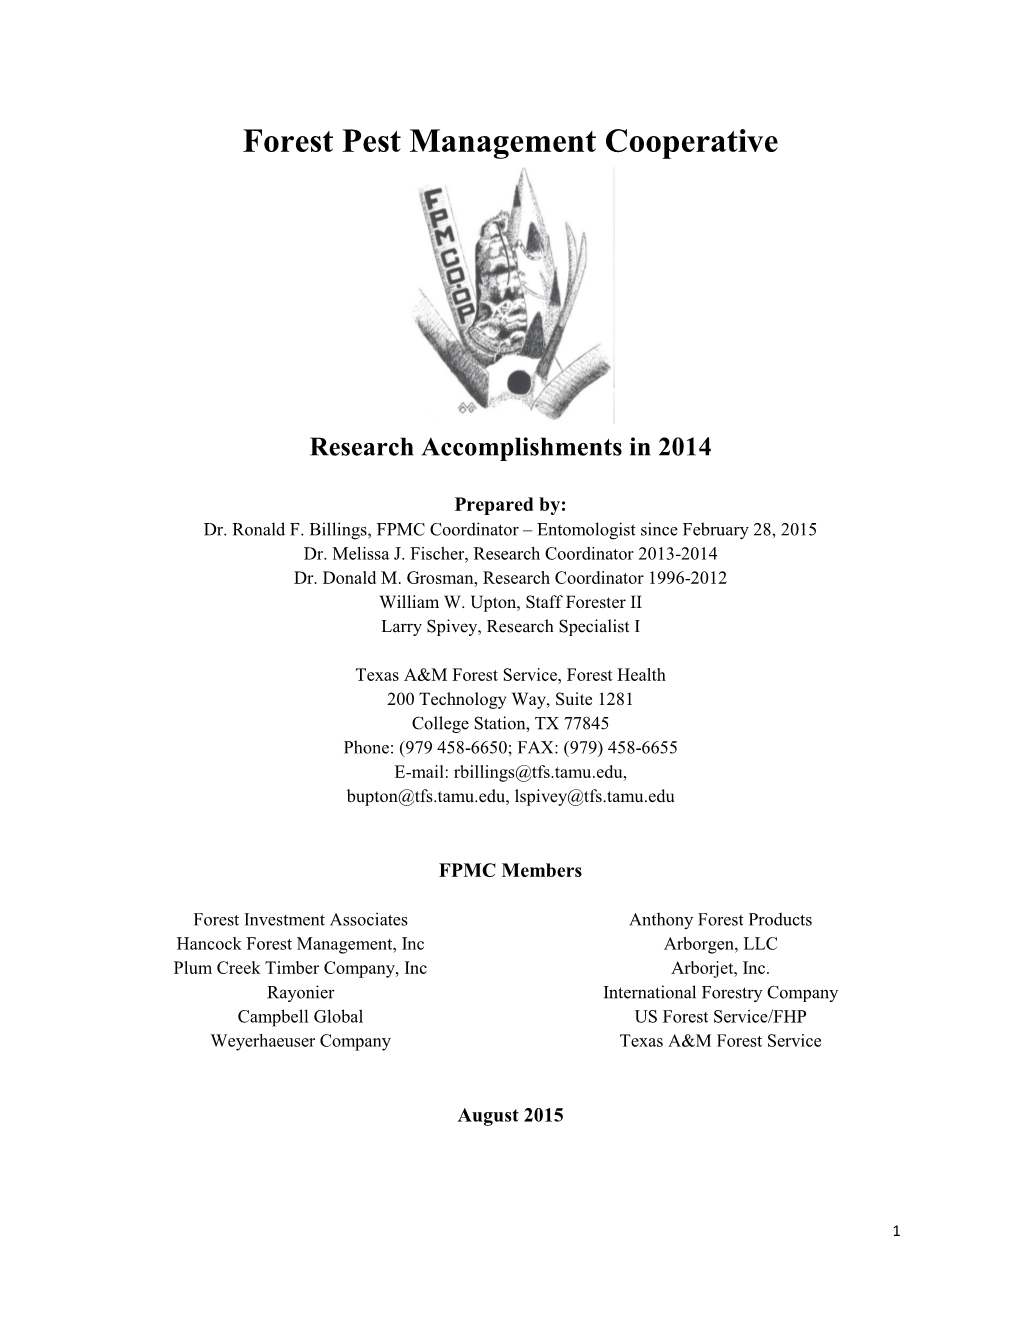 Report on Research Accomplishments in 2014